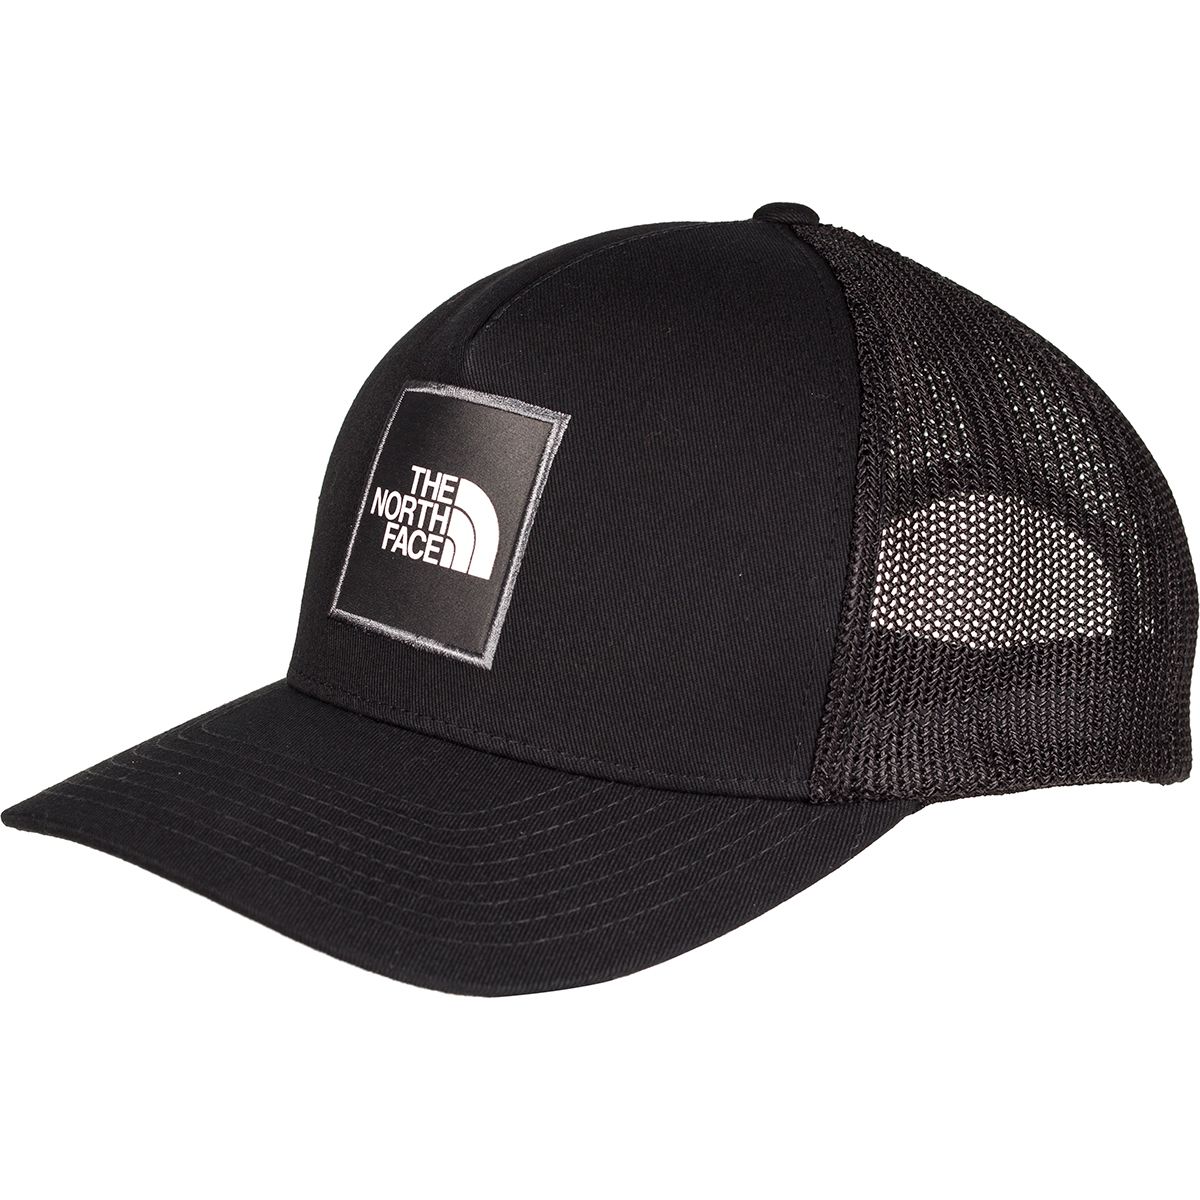 The North Face Keep It Structured Trucker Hat | Backcountry.com